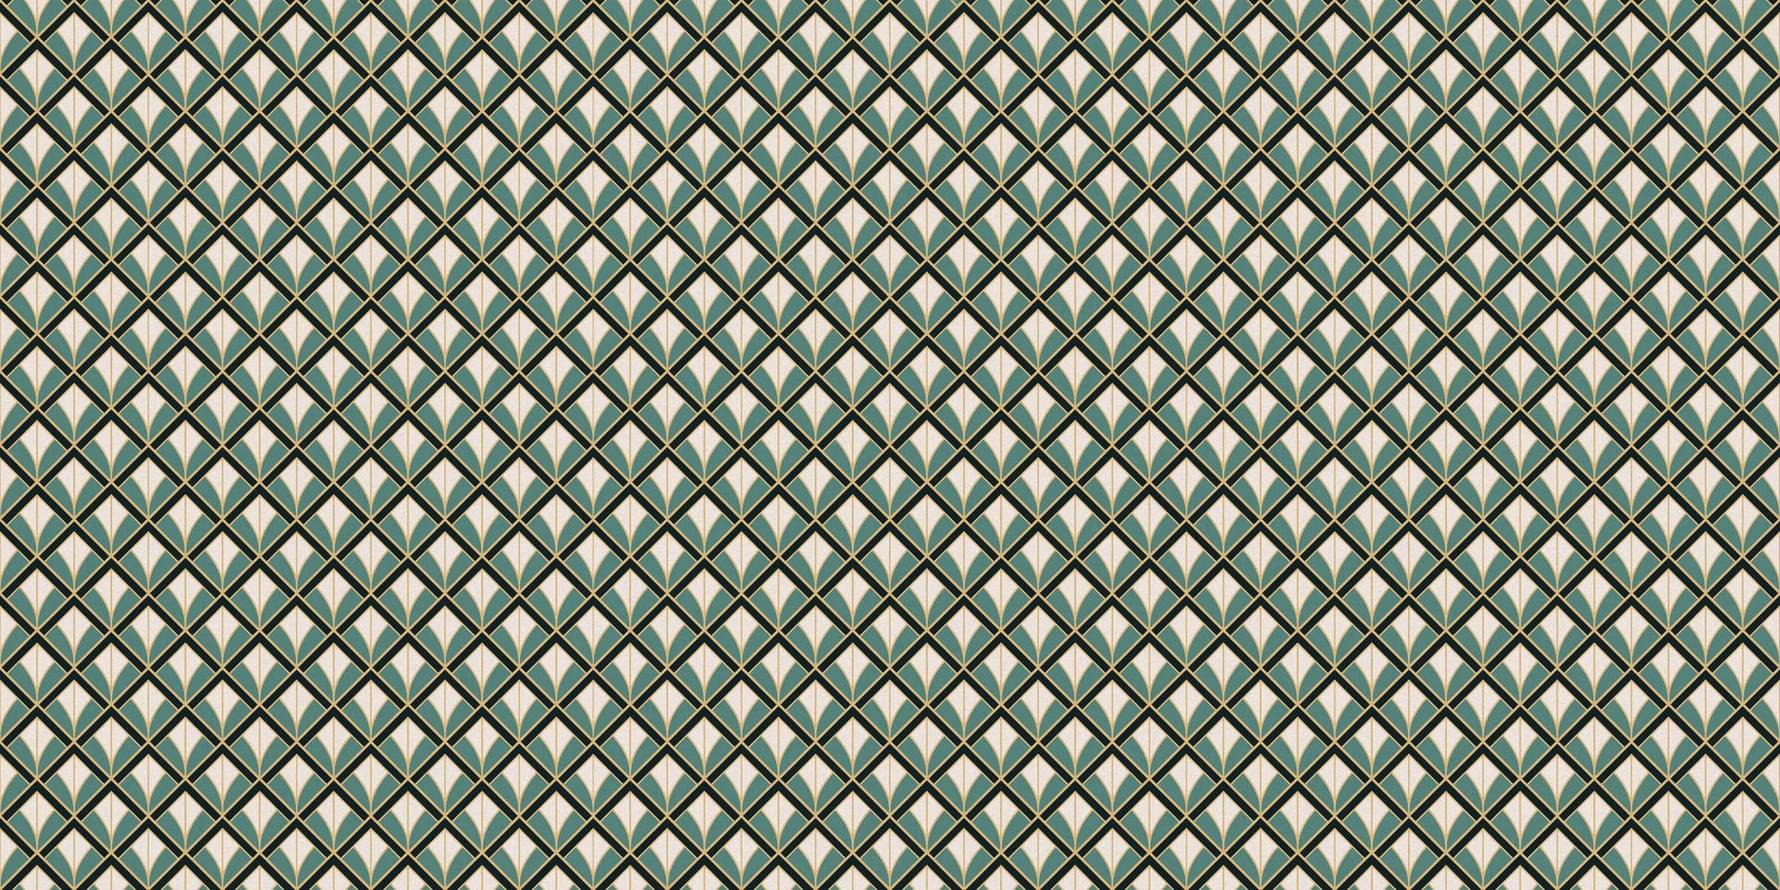 ABK Wide And Style Plus Deco Mint Digit+ 60x120